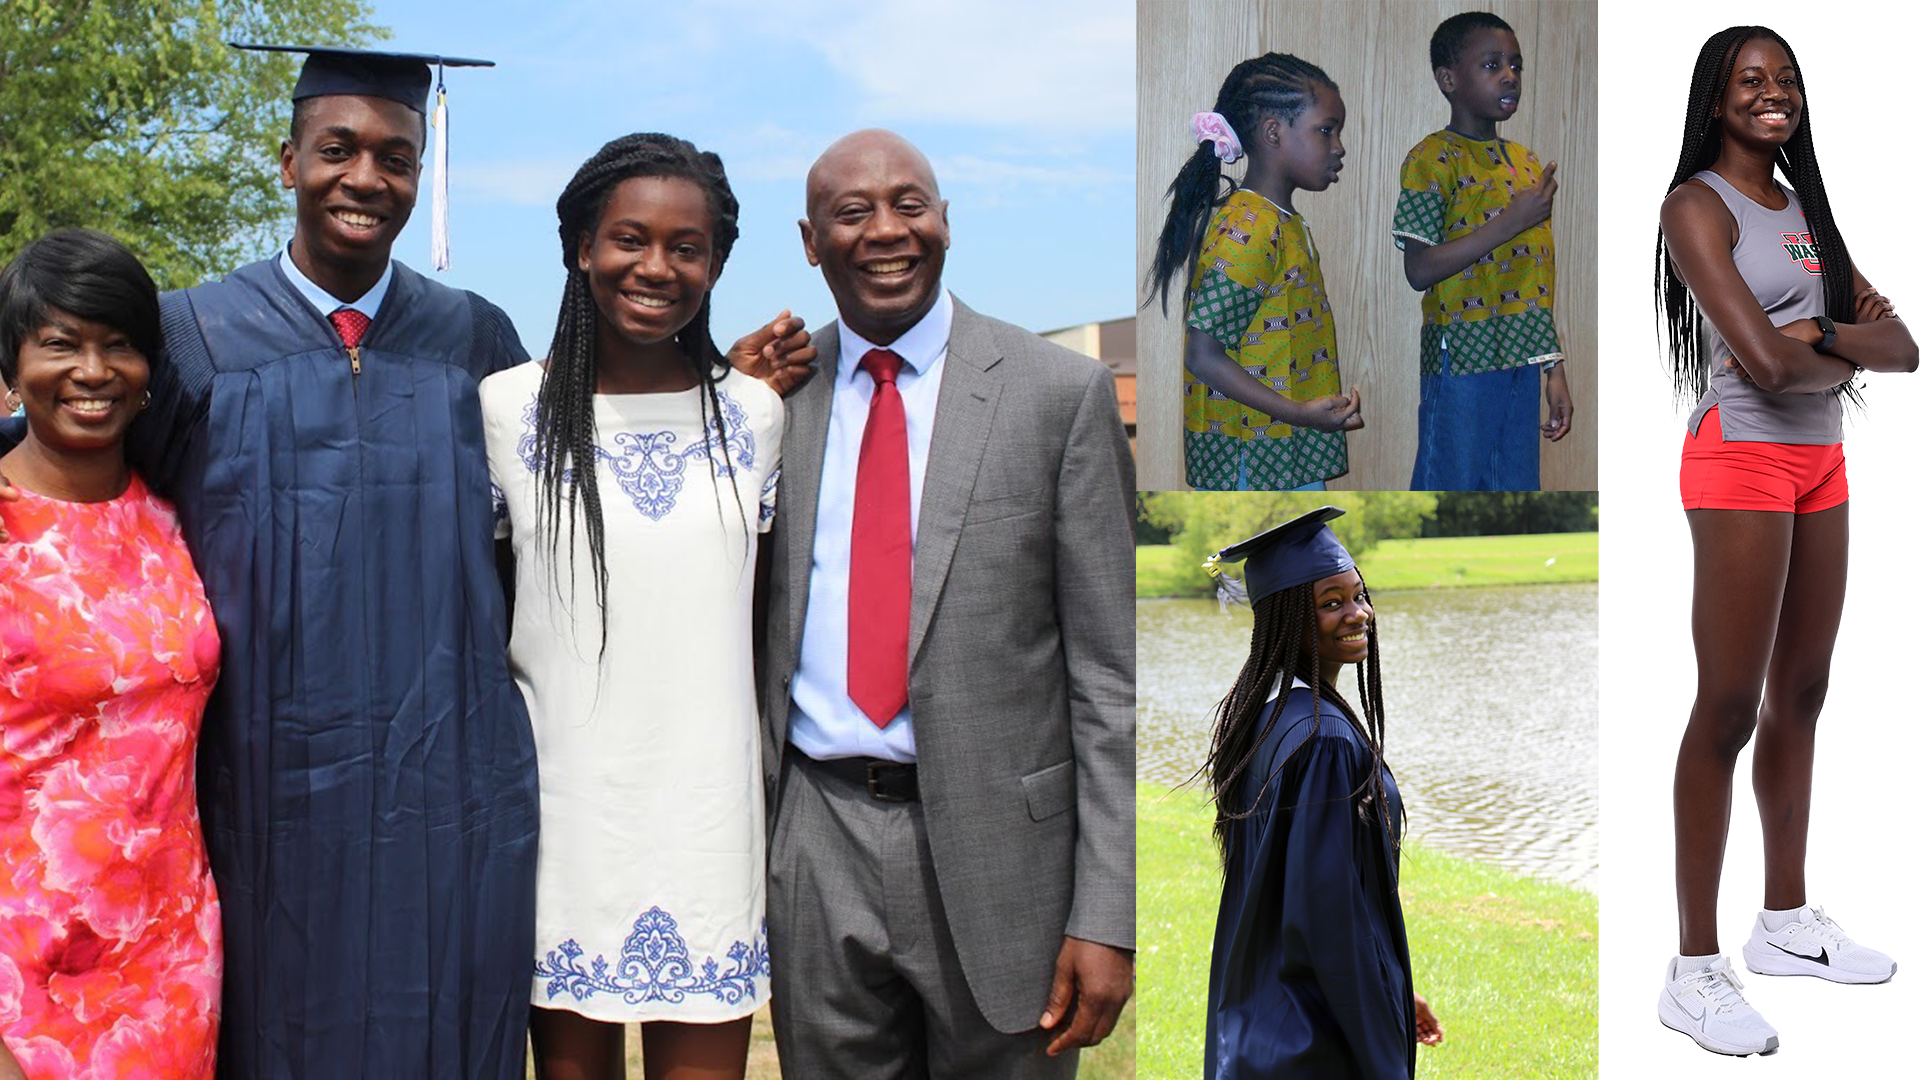 Several photos of Ebun Opata, including at her brother's graduation with their parents.